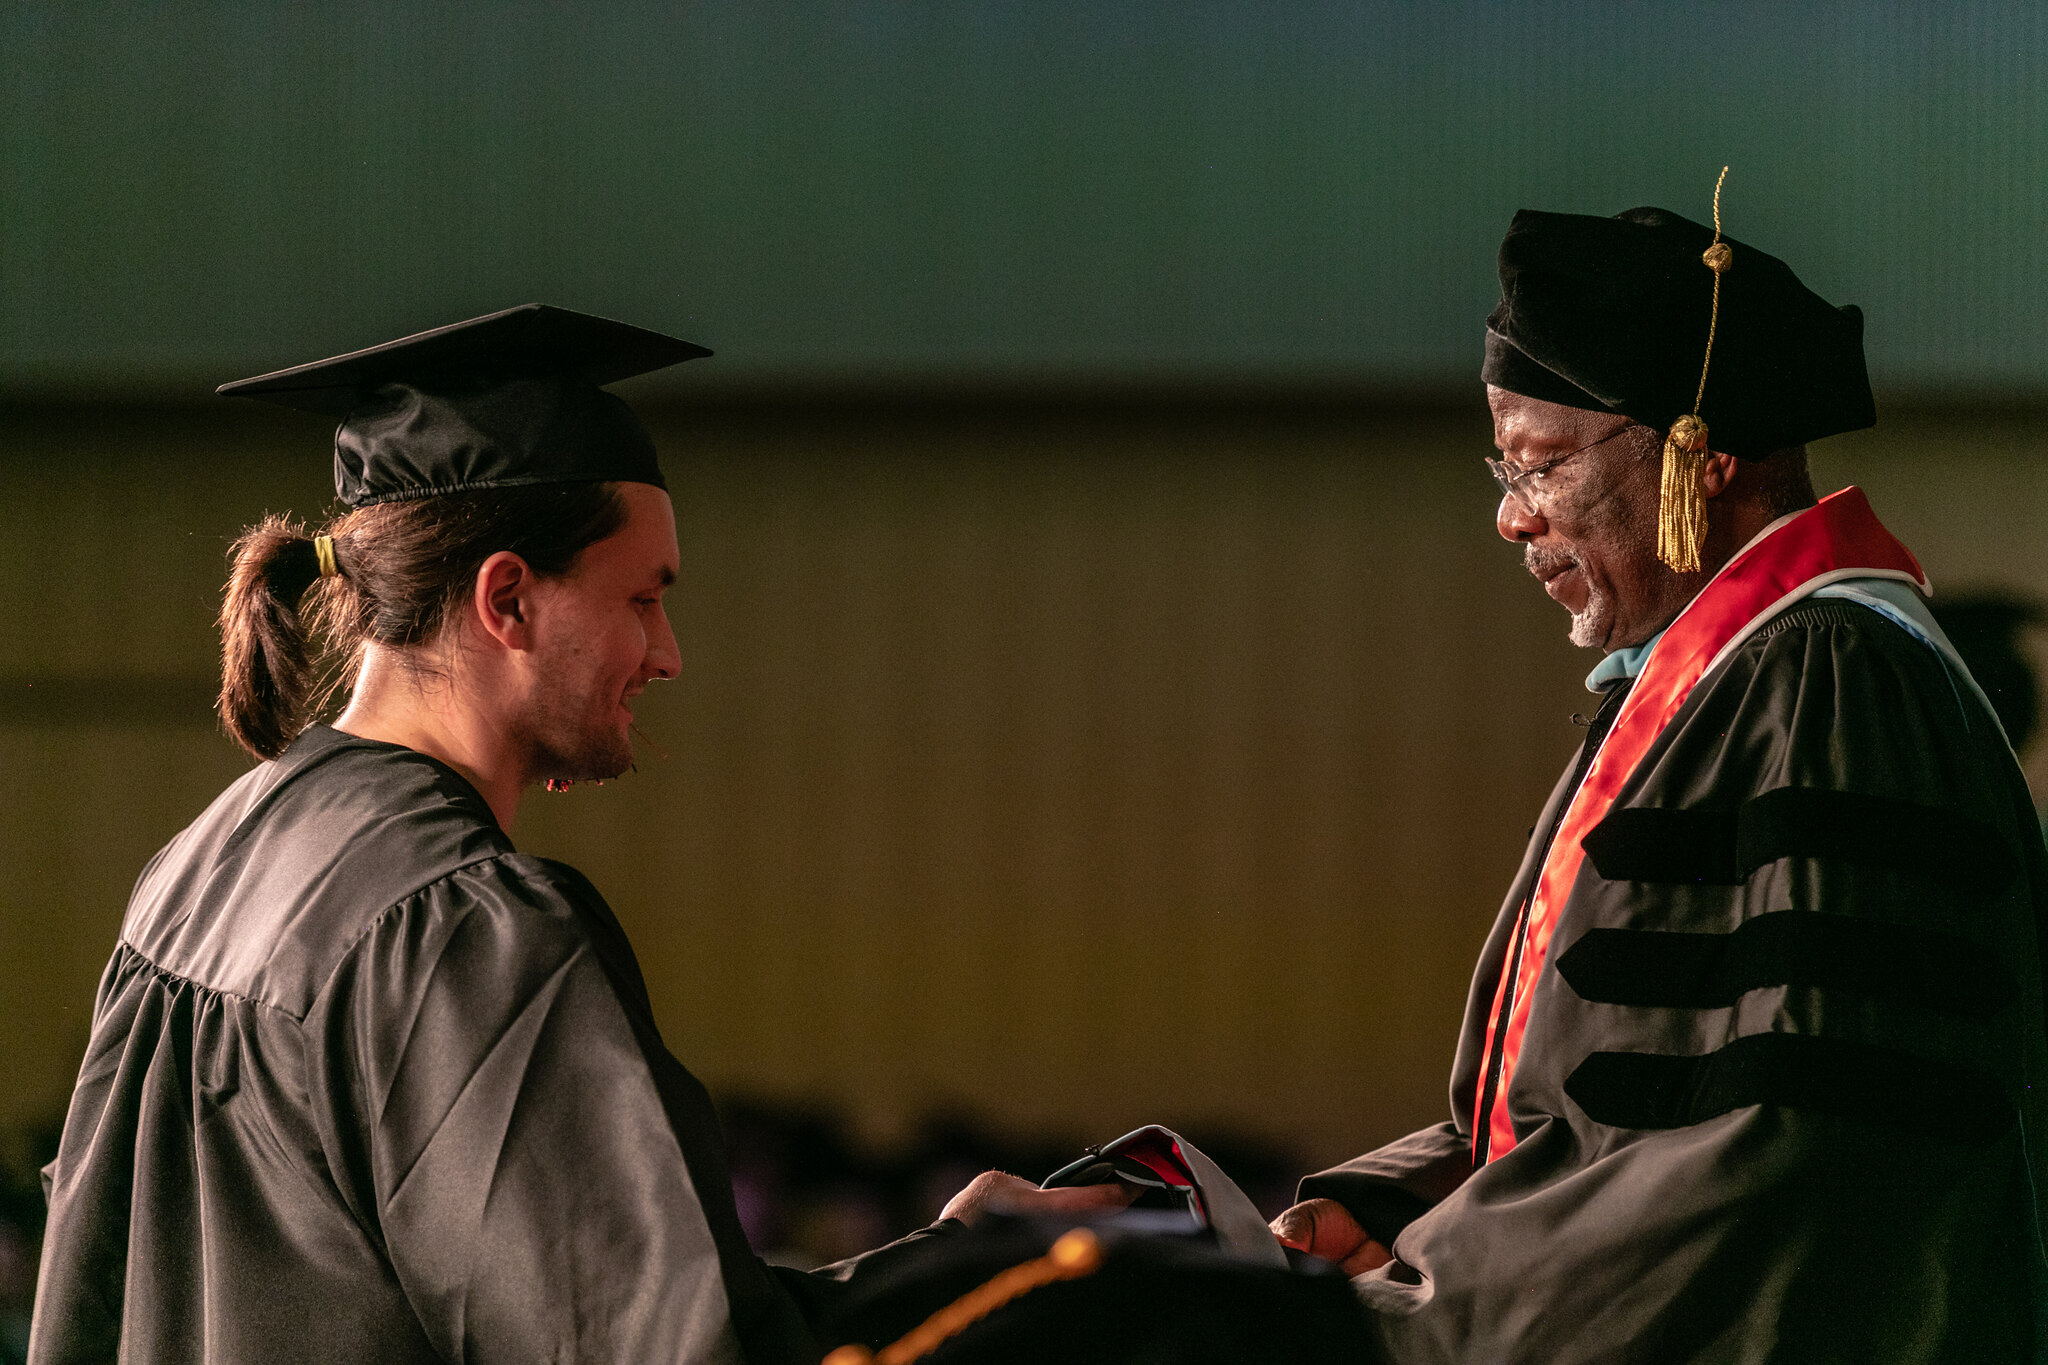 Student shaking hands with his professor at the hooding ceremony